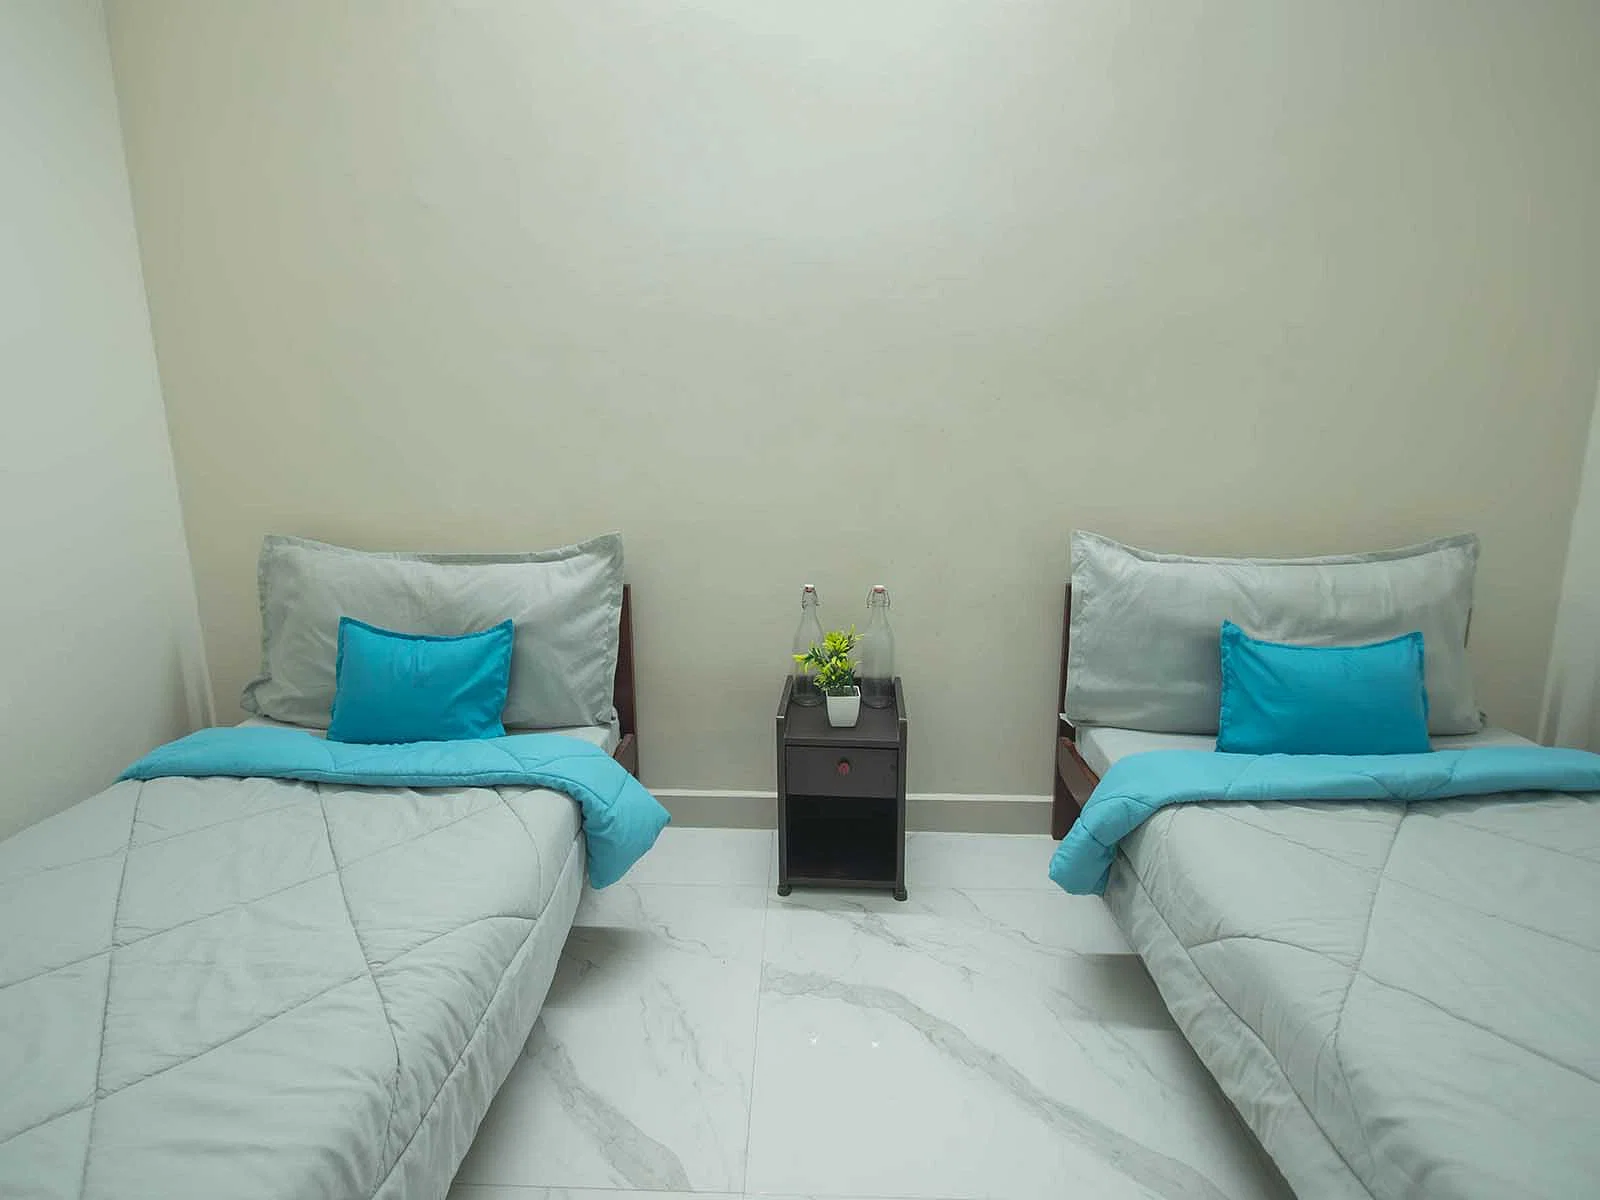 budget-friendly PGs and hostels for unisex with single rooms with daily hopusekeeping-Zolo Edge